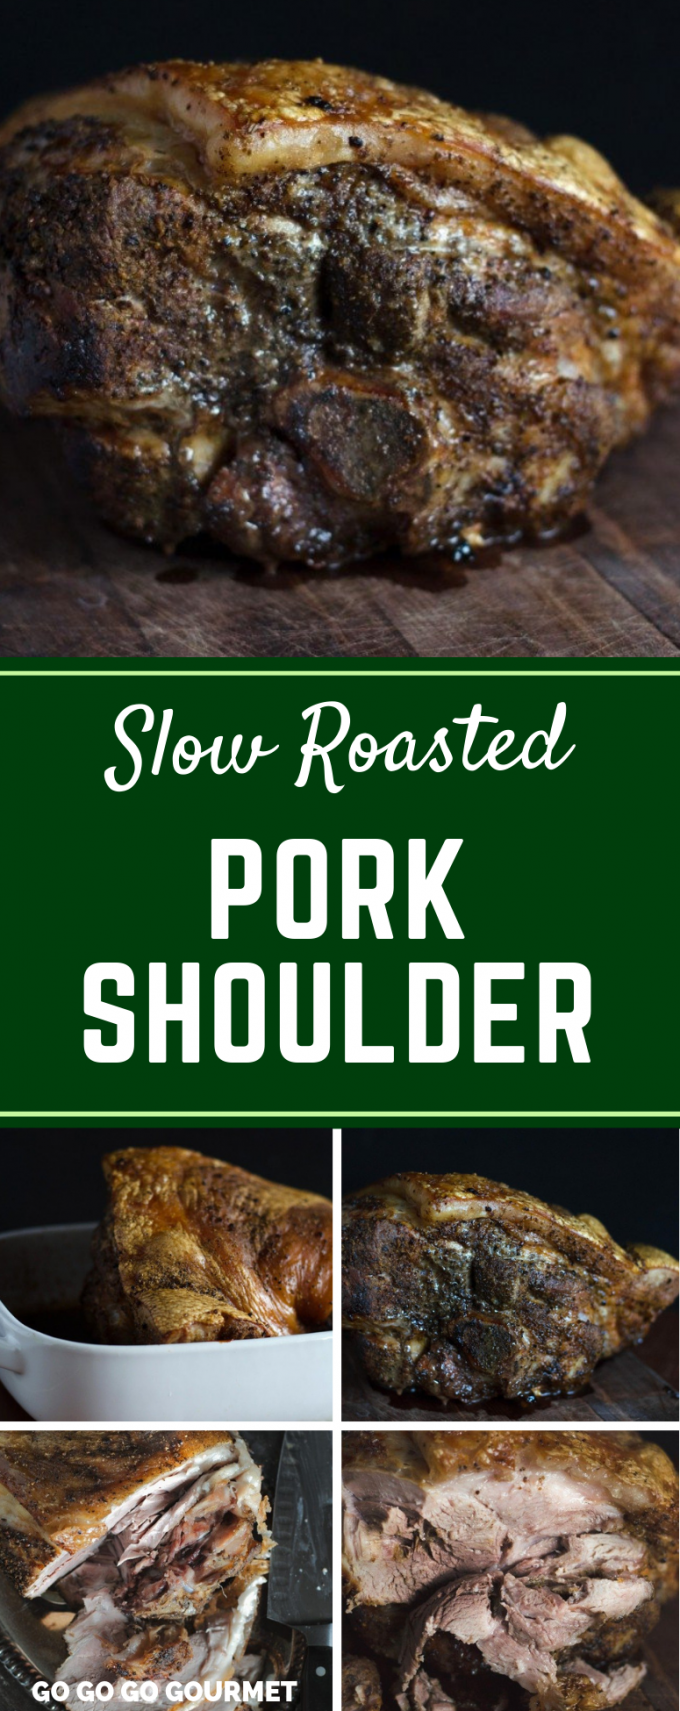 Easy dinners don't get better than this Slow Roasted Pork Shoulder recipe! The shoulder is one of my favorite cuts of meat, and cooking in ovens is the best method of cooking! #gogogogourmet #slowroastedporkshoulder #porkshoulderrecipes #slowroastedporkroast via @gogogogourmet